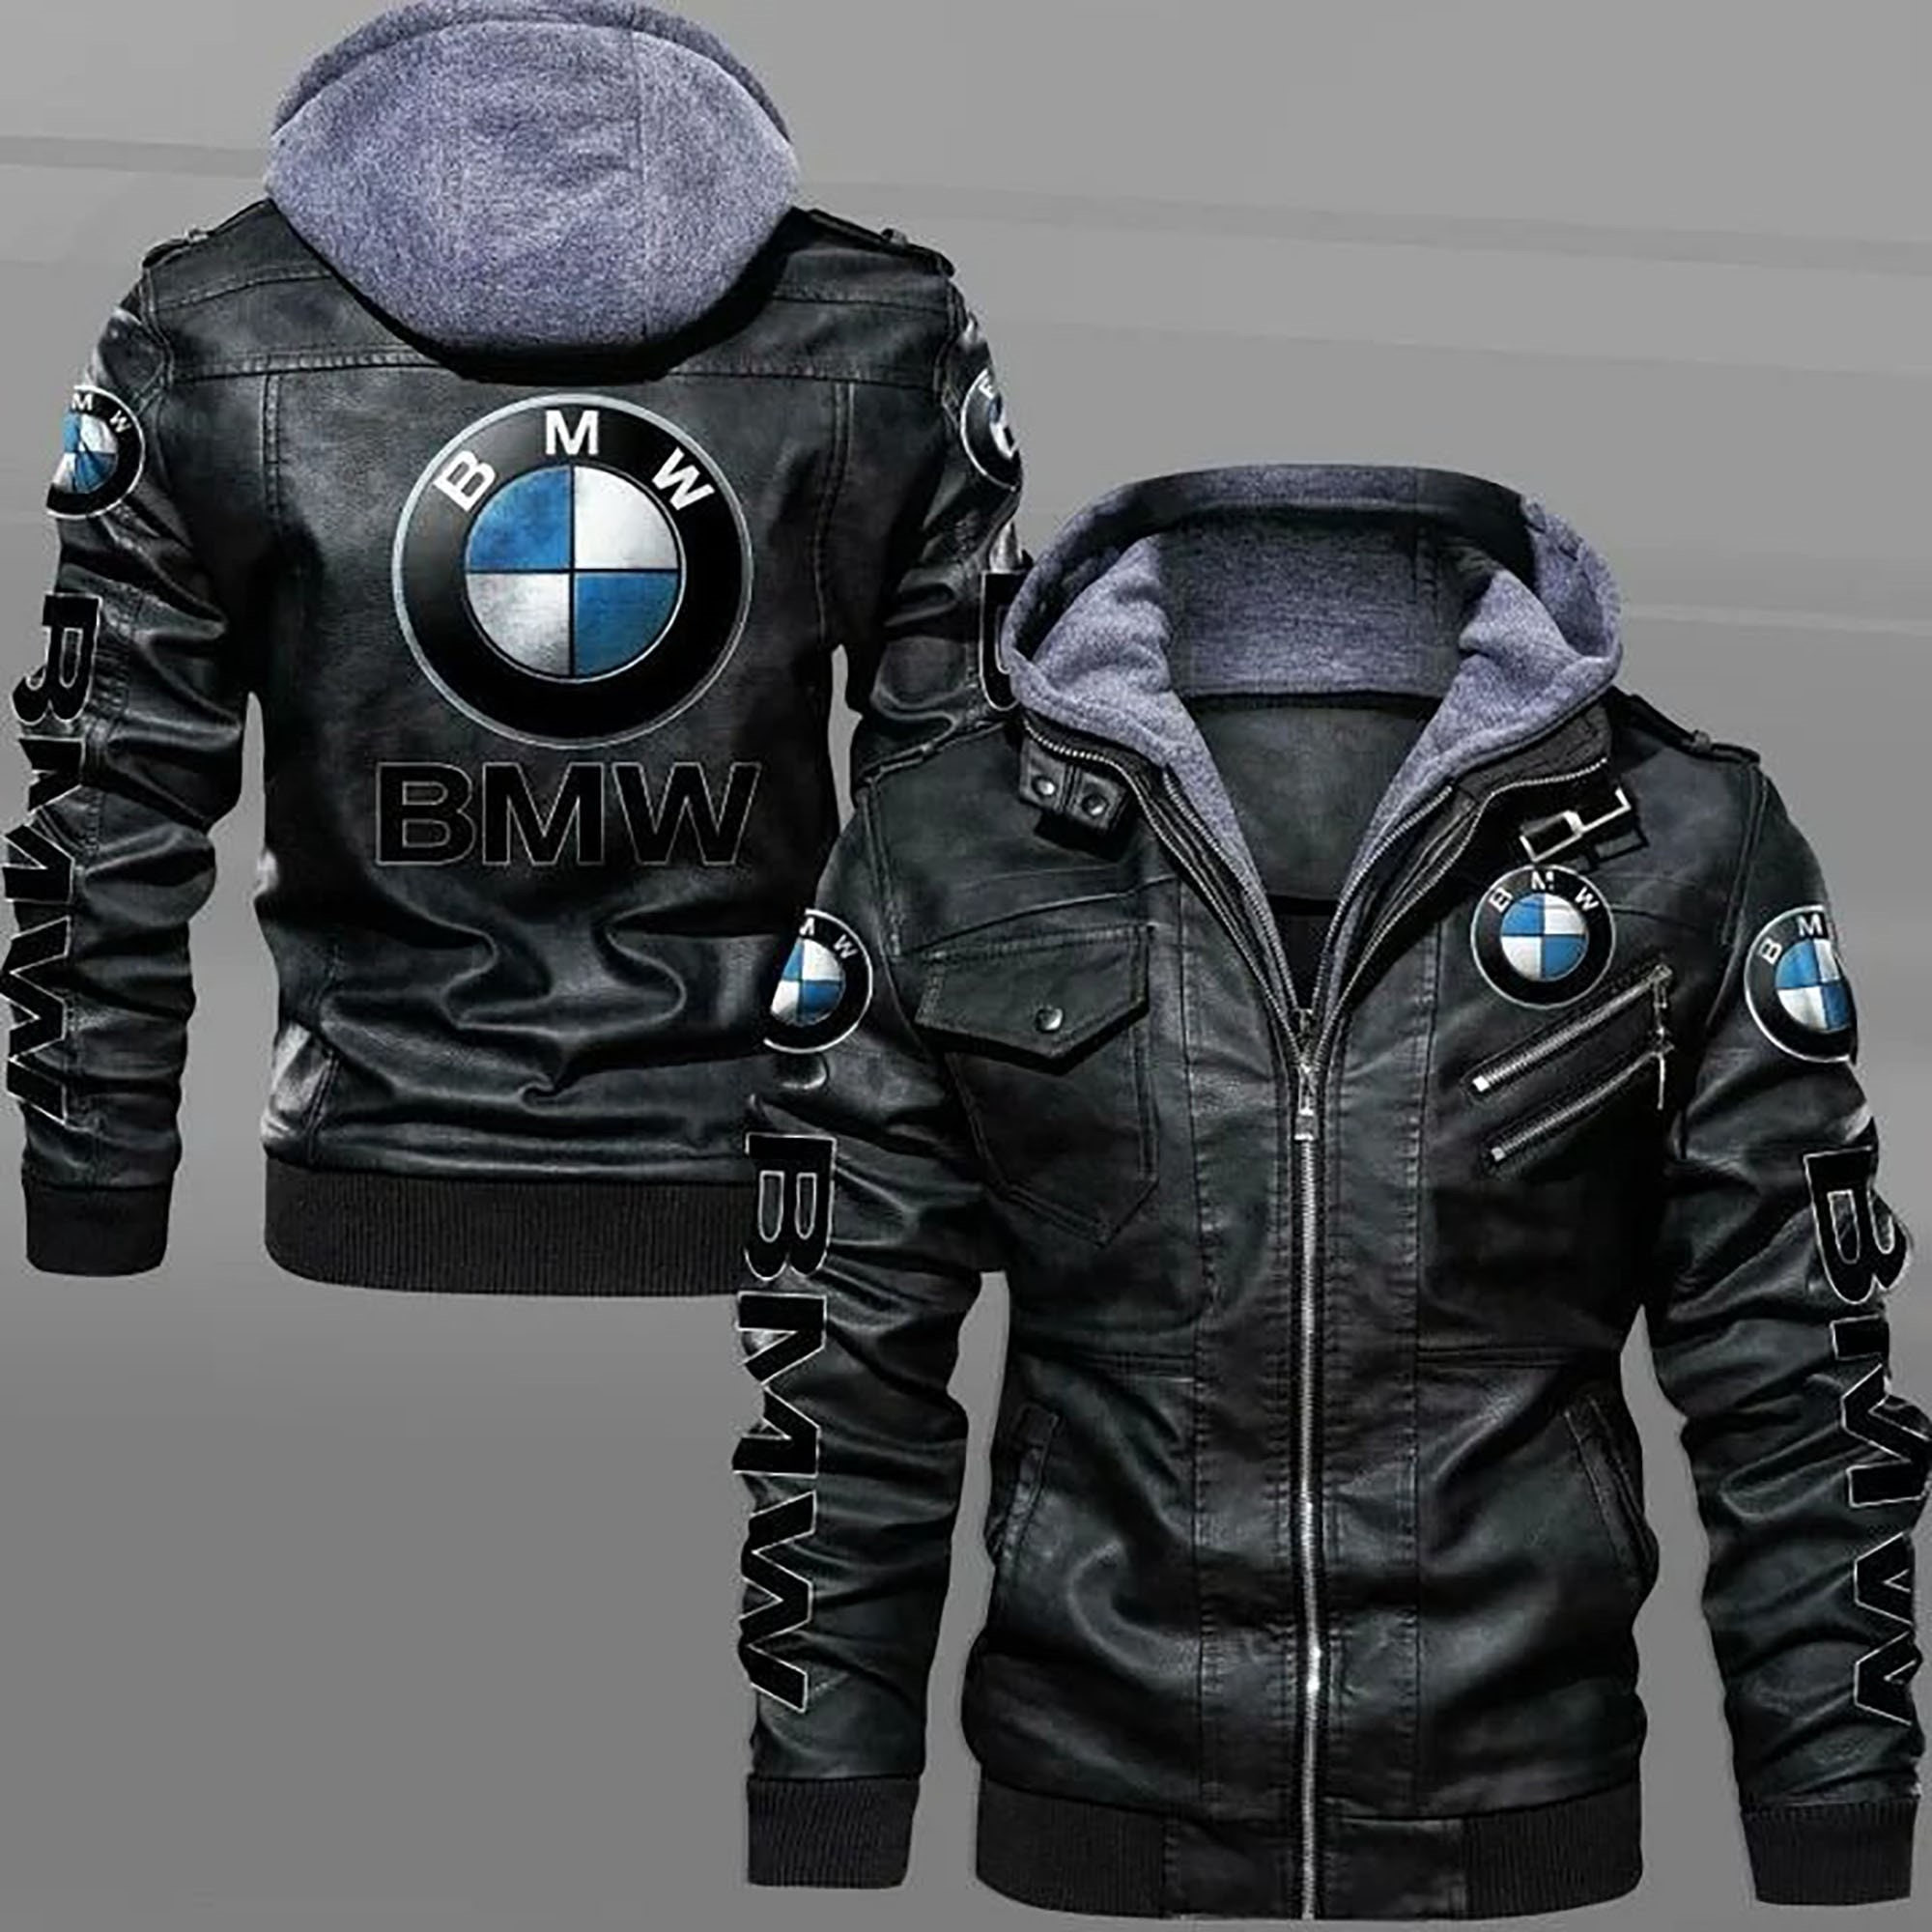 These Amazing Leather Jacket will add to the appeal of your outfit 224